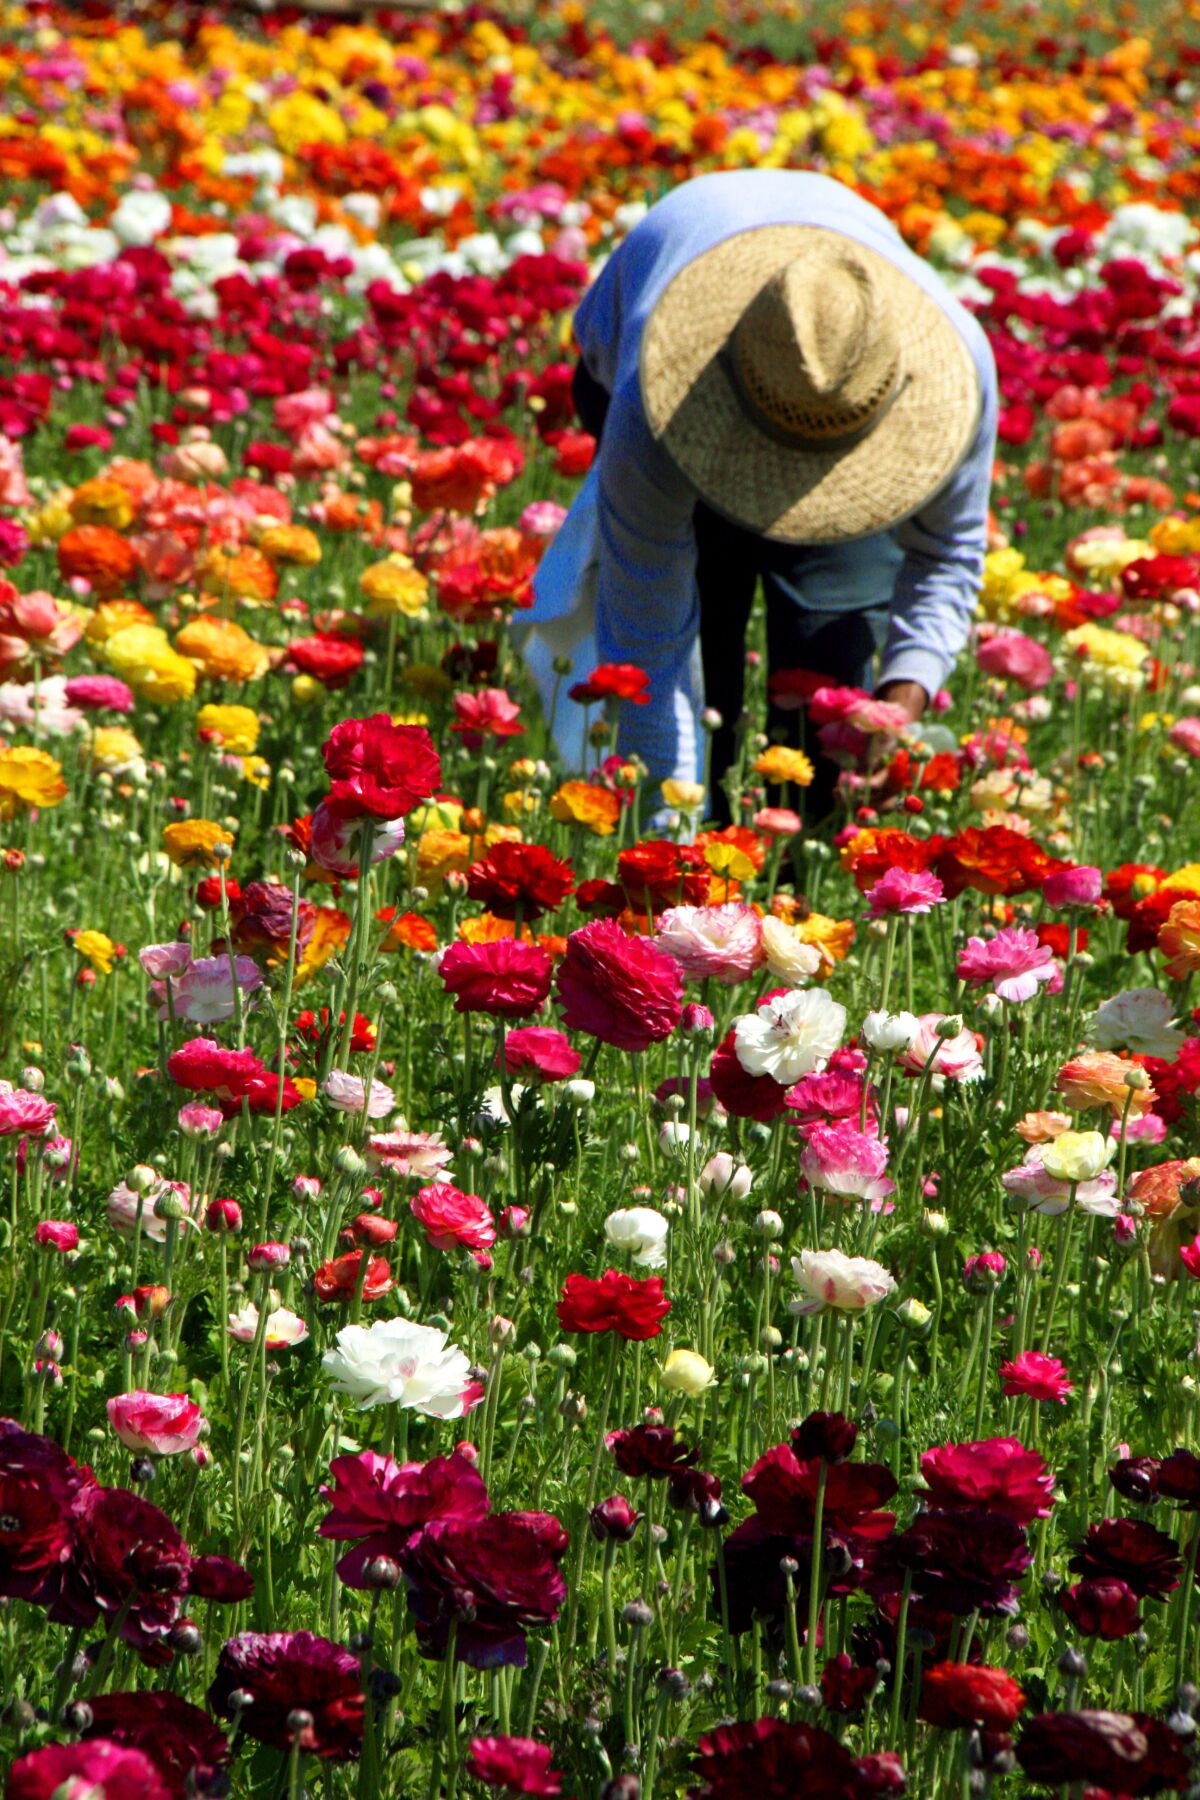 A worker picks blooms for shipment in The Flower Fields in Carlsbad.